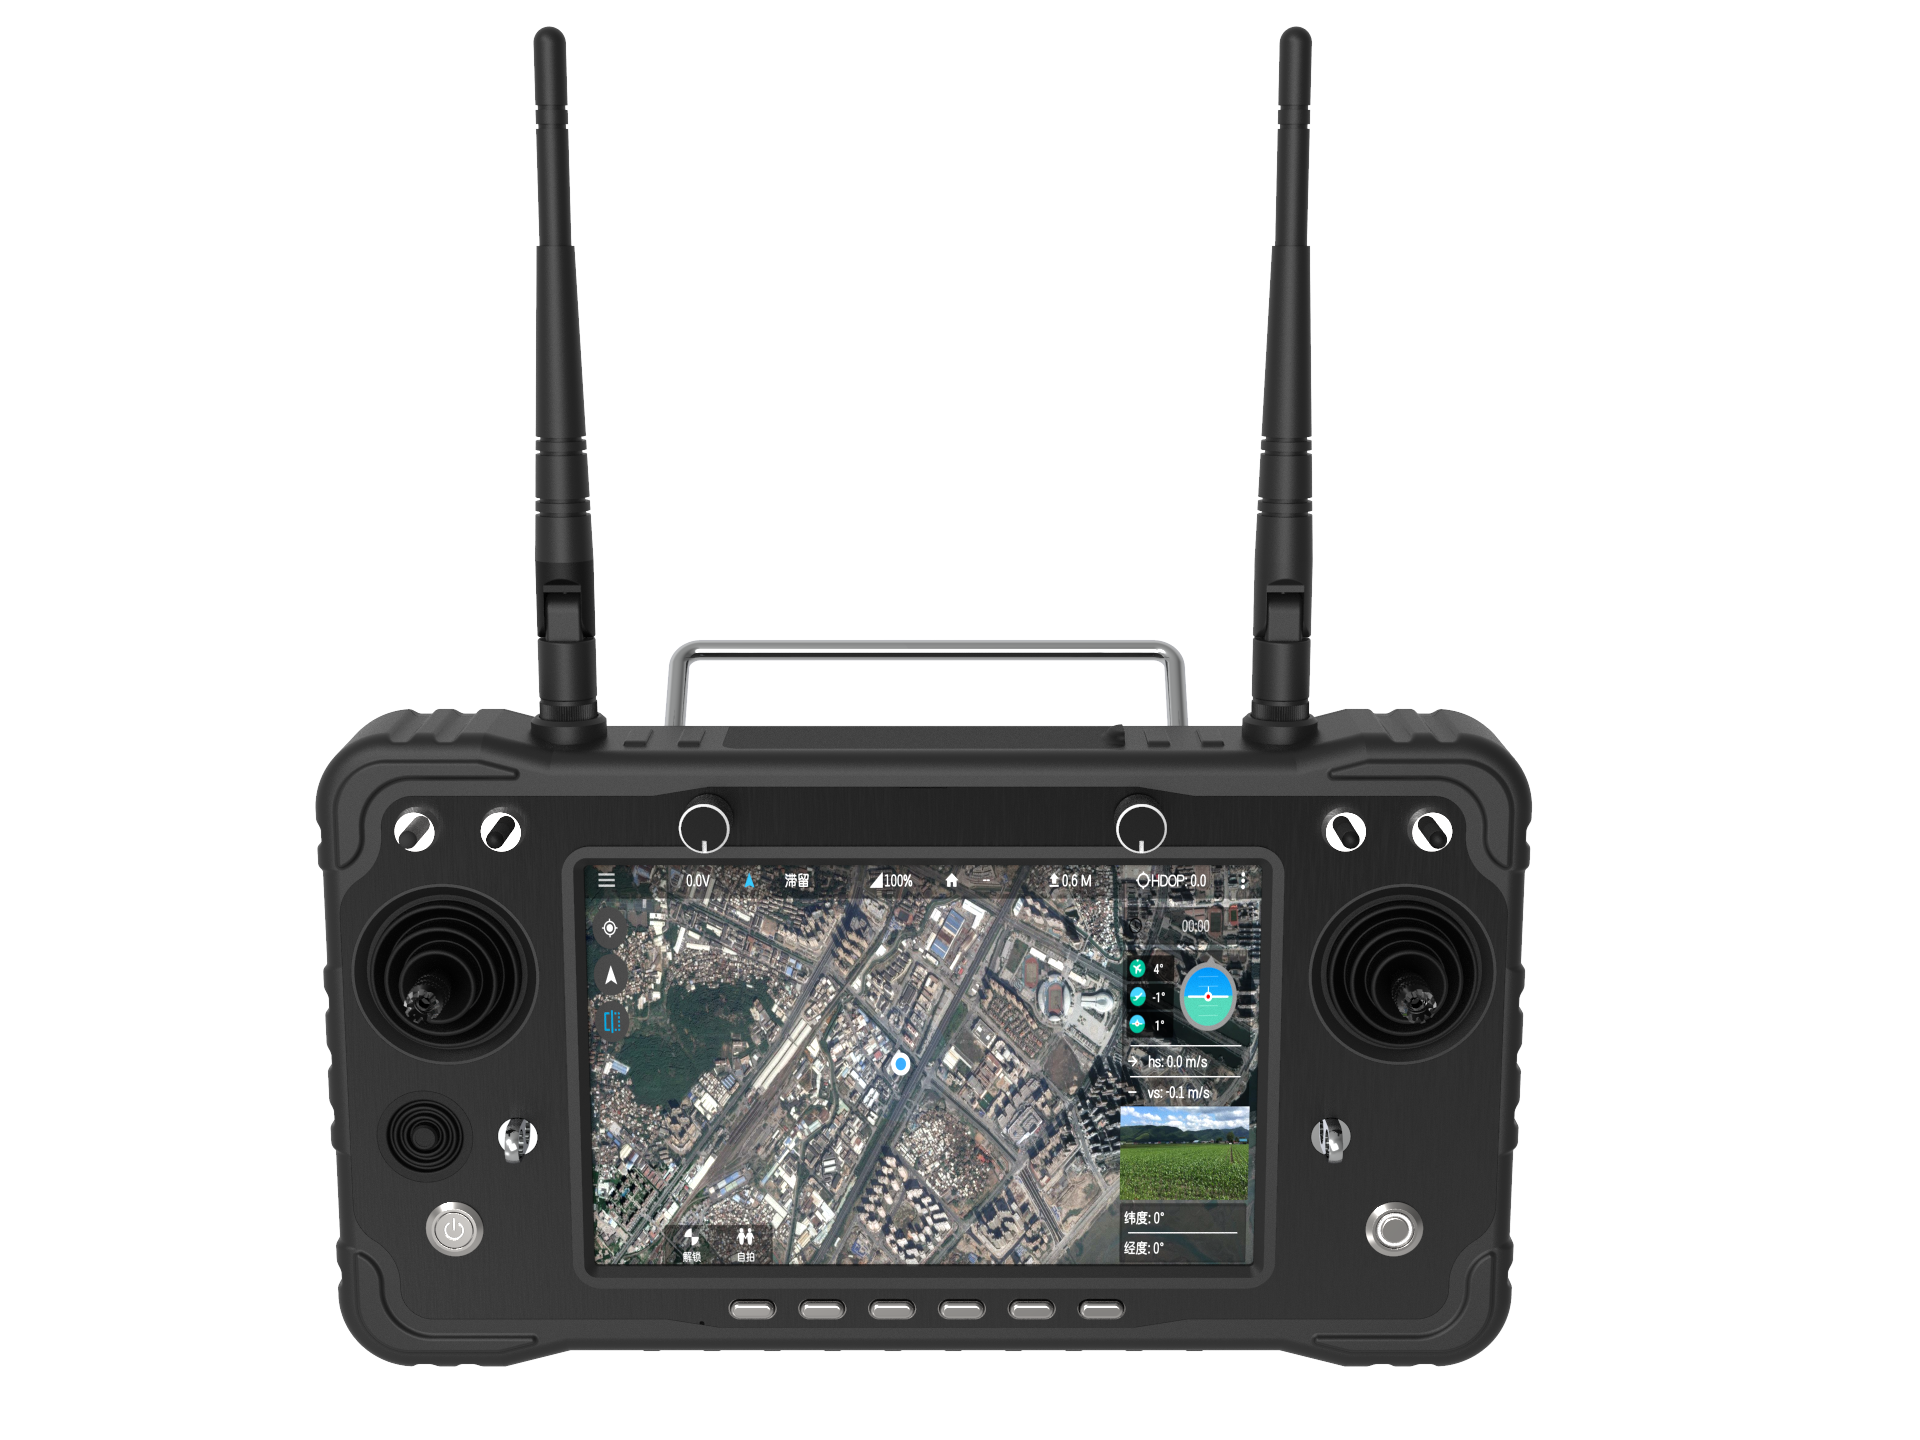 The C-75 Fregata is supported by an on-ground or on-hand Remote Controller 